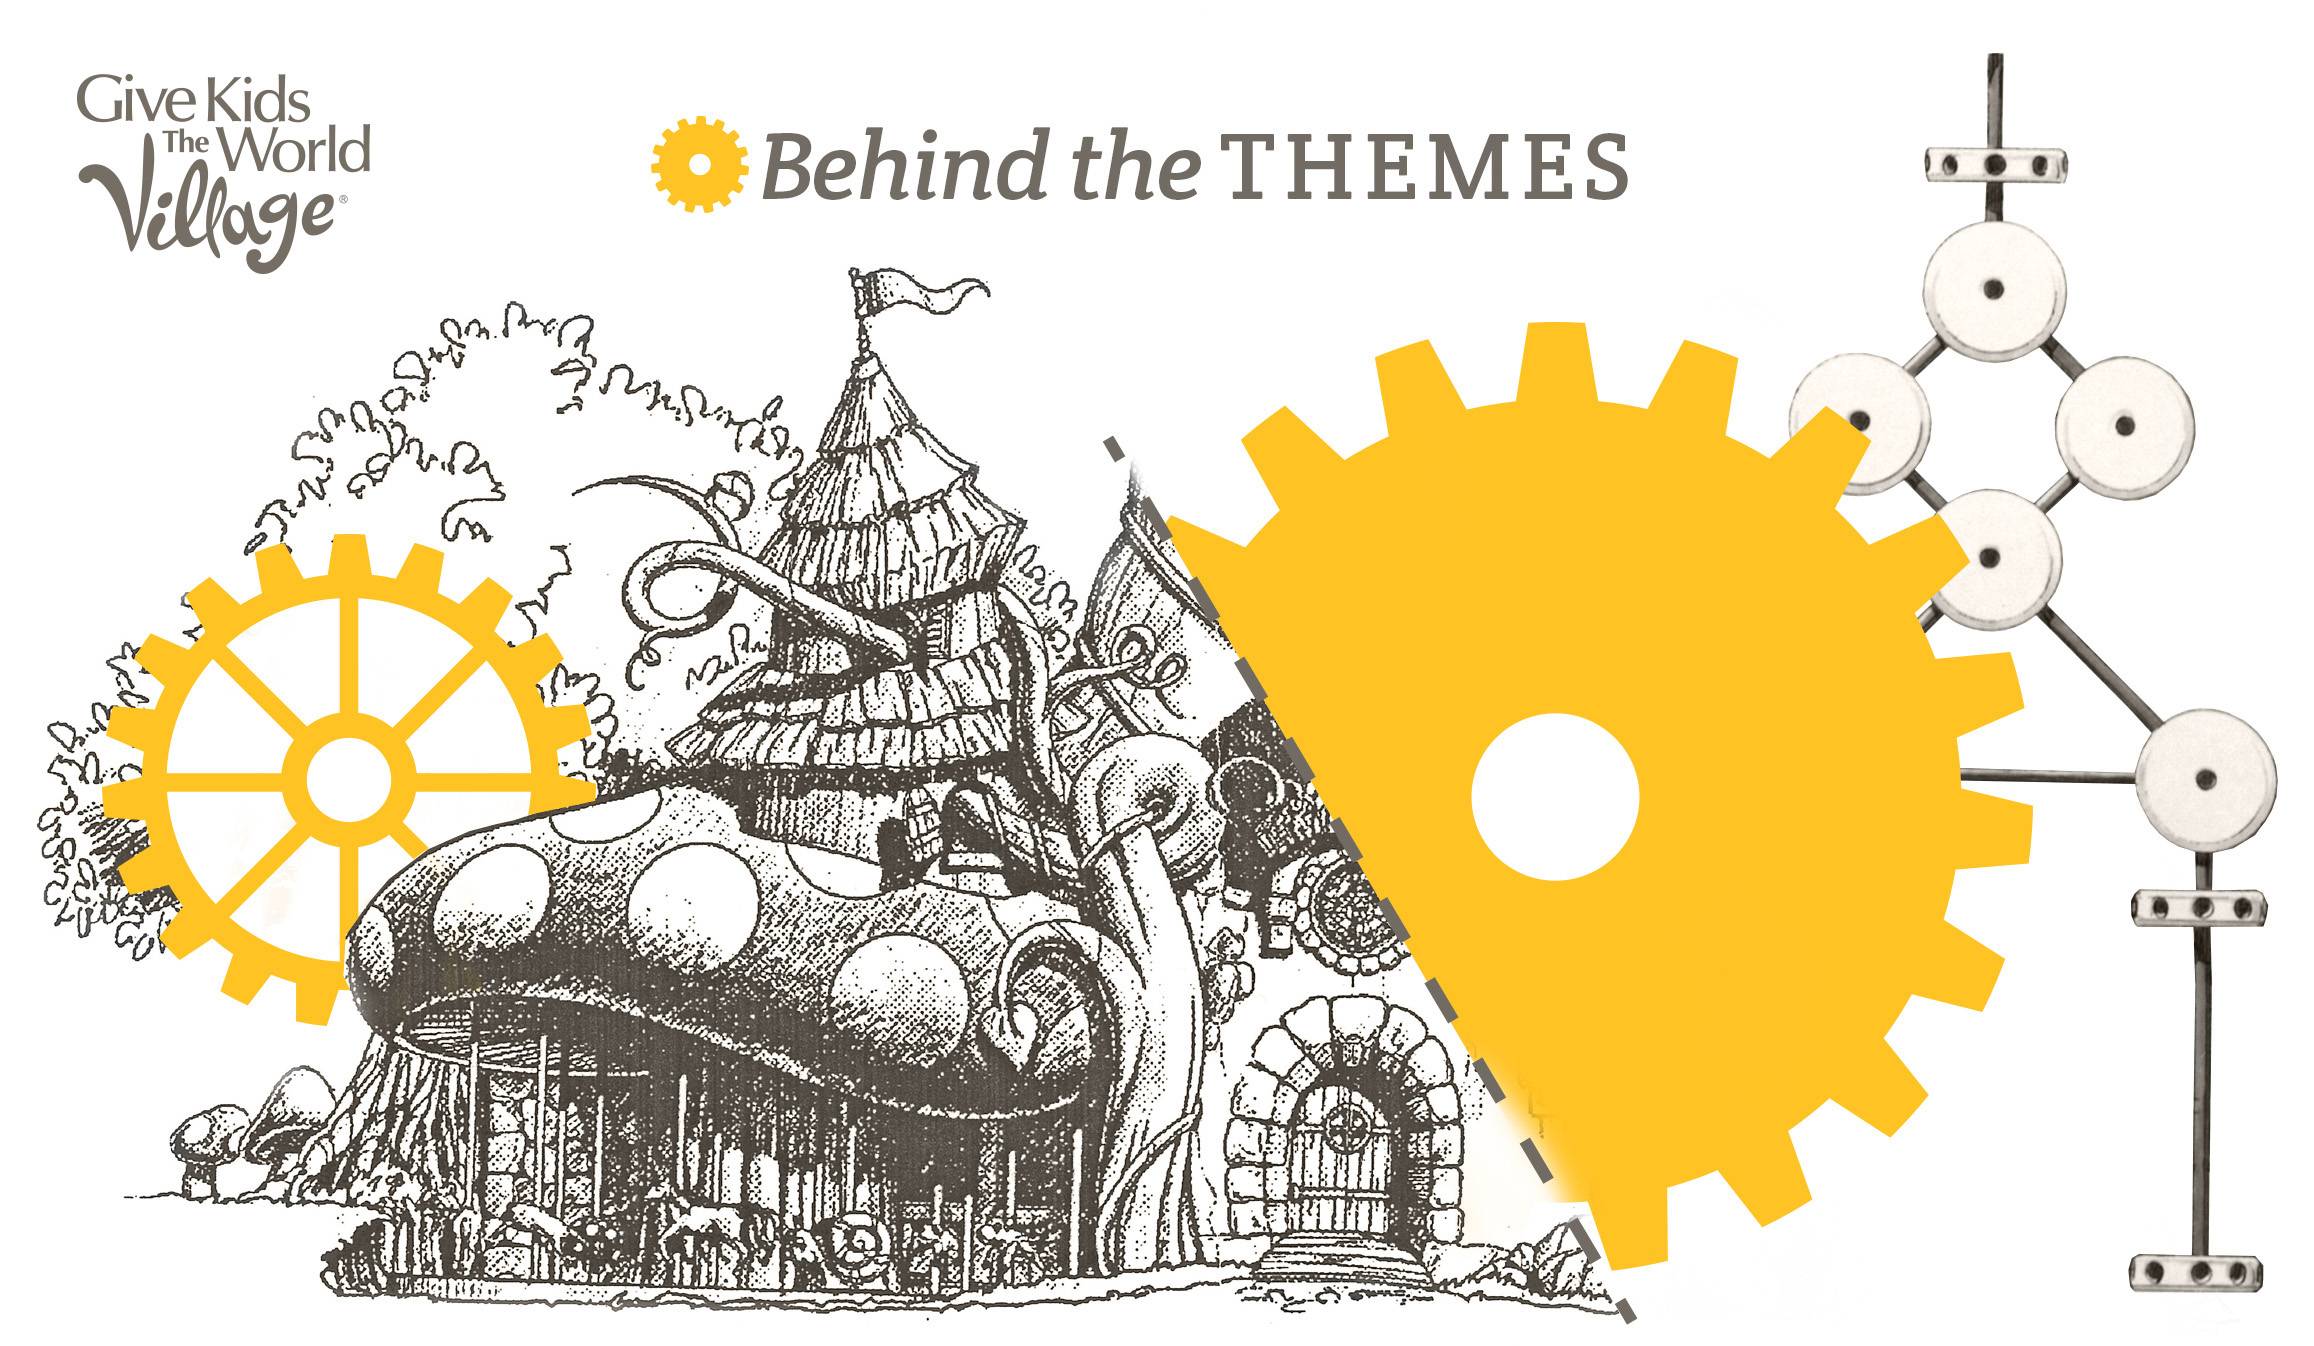 Support Give Kids The World Village with their new 'Behind The Themes' tour series